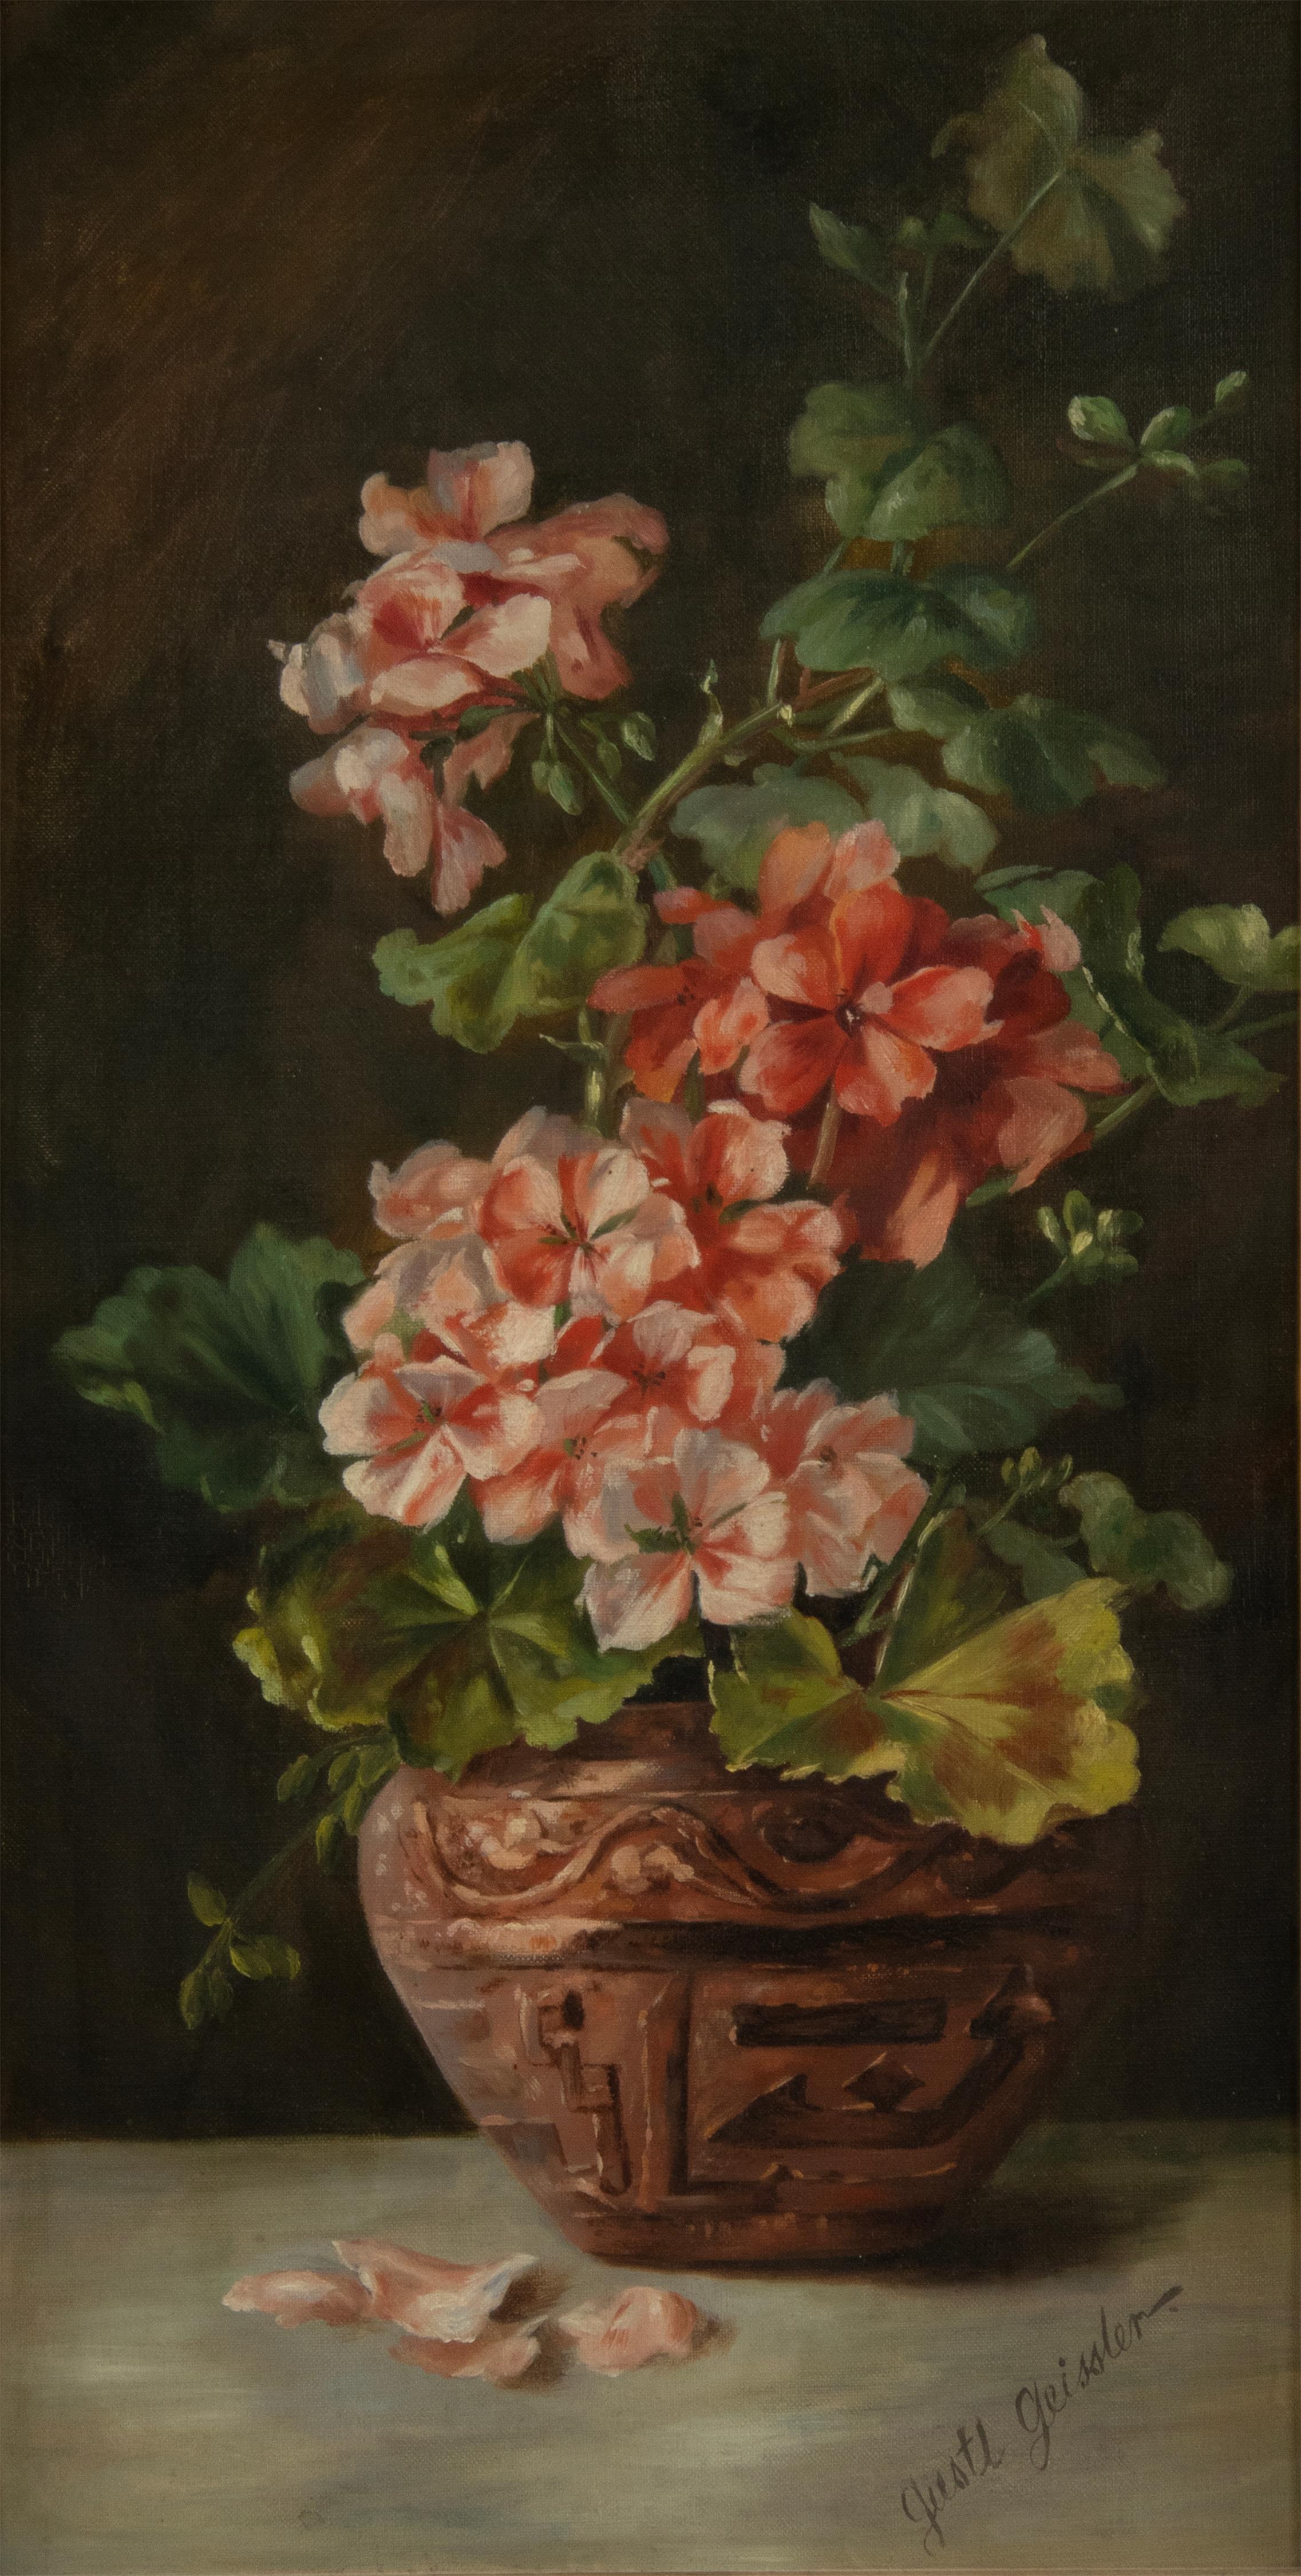 An antique flower stil life oil painting, depicting geranium flowers in a ceramic vase. Signed right under: Gustl Geissler. Painted on canvas. In a beautiful gesso gold leaf frame, with acorns and oak leaf. The canvas and paint are in good